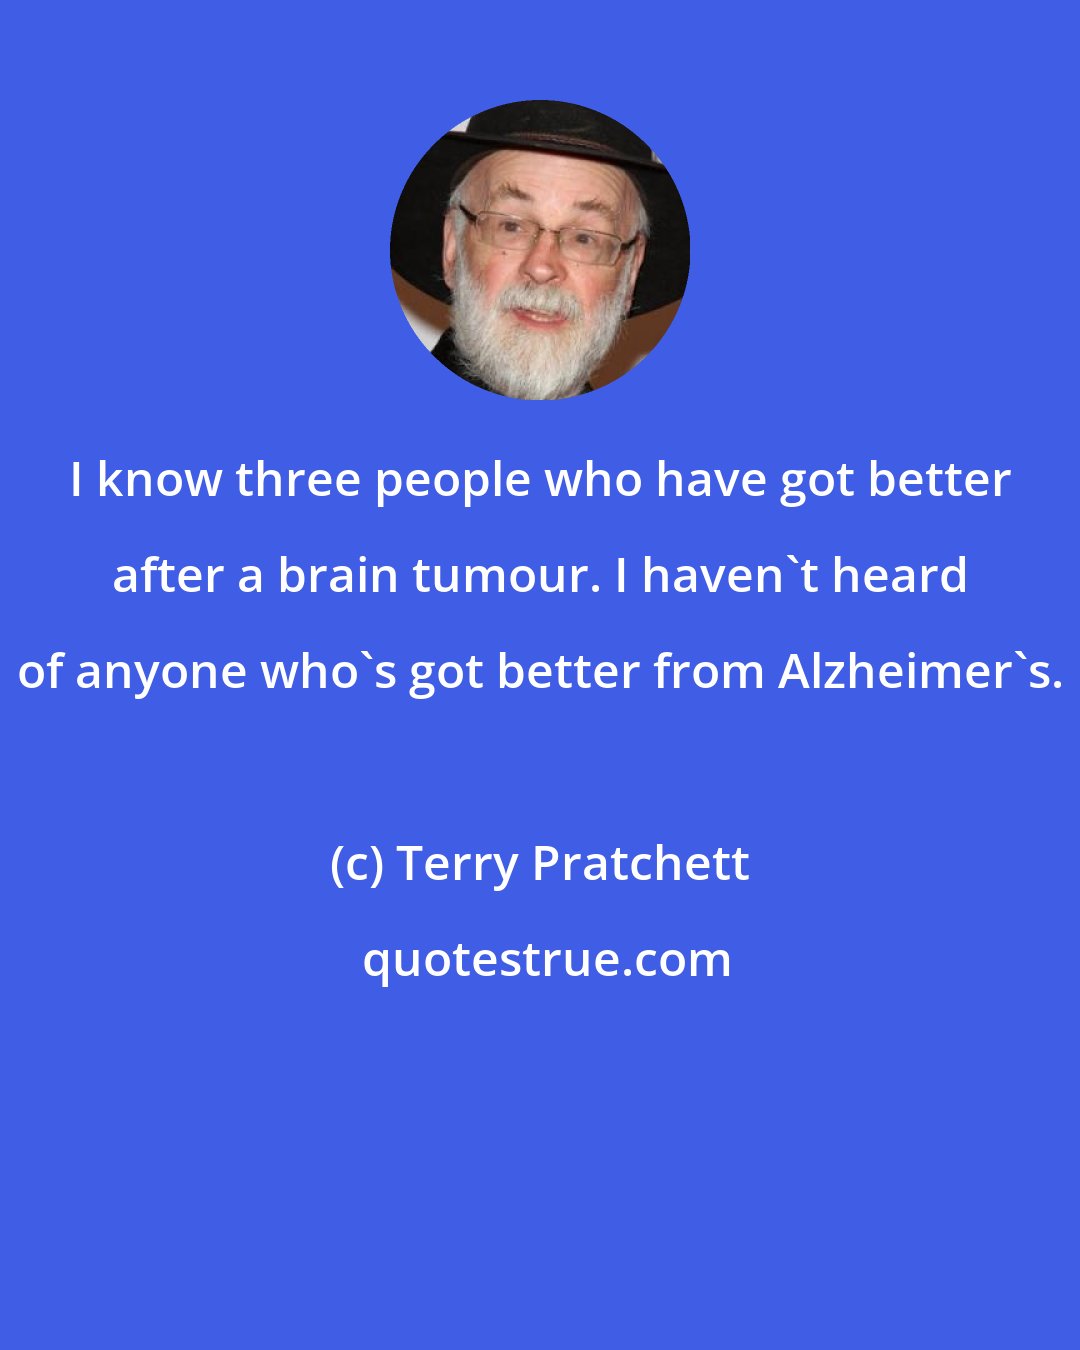 Terry Pratchett: I know three people who have got better after a brain tumour. I haven't heard of anyone who's got better from Alzheimer's.